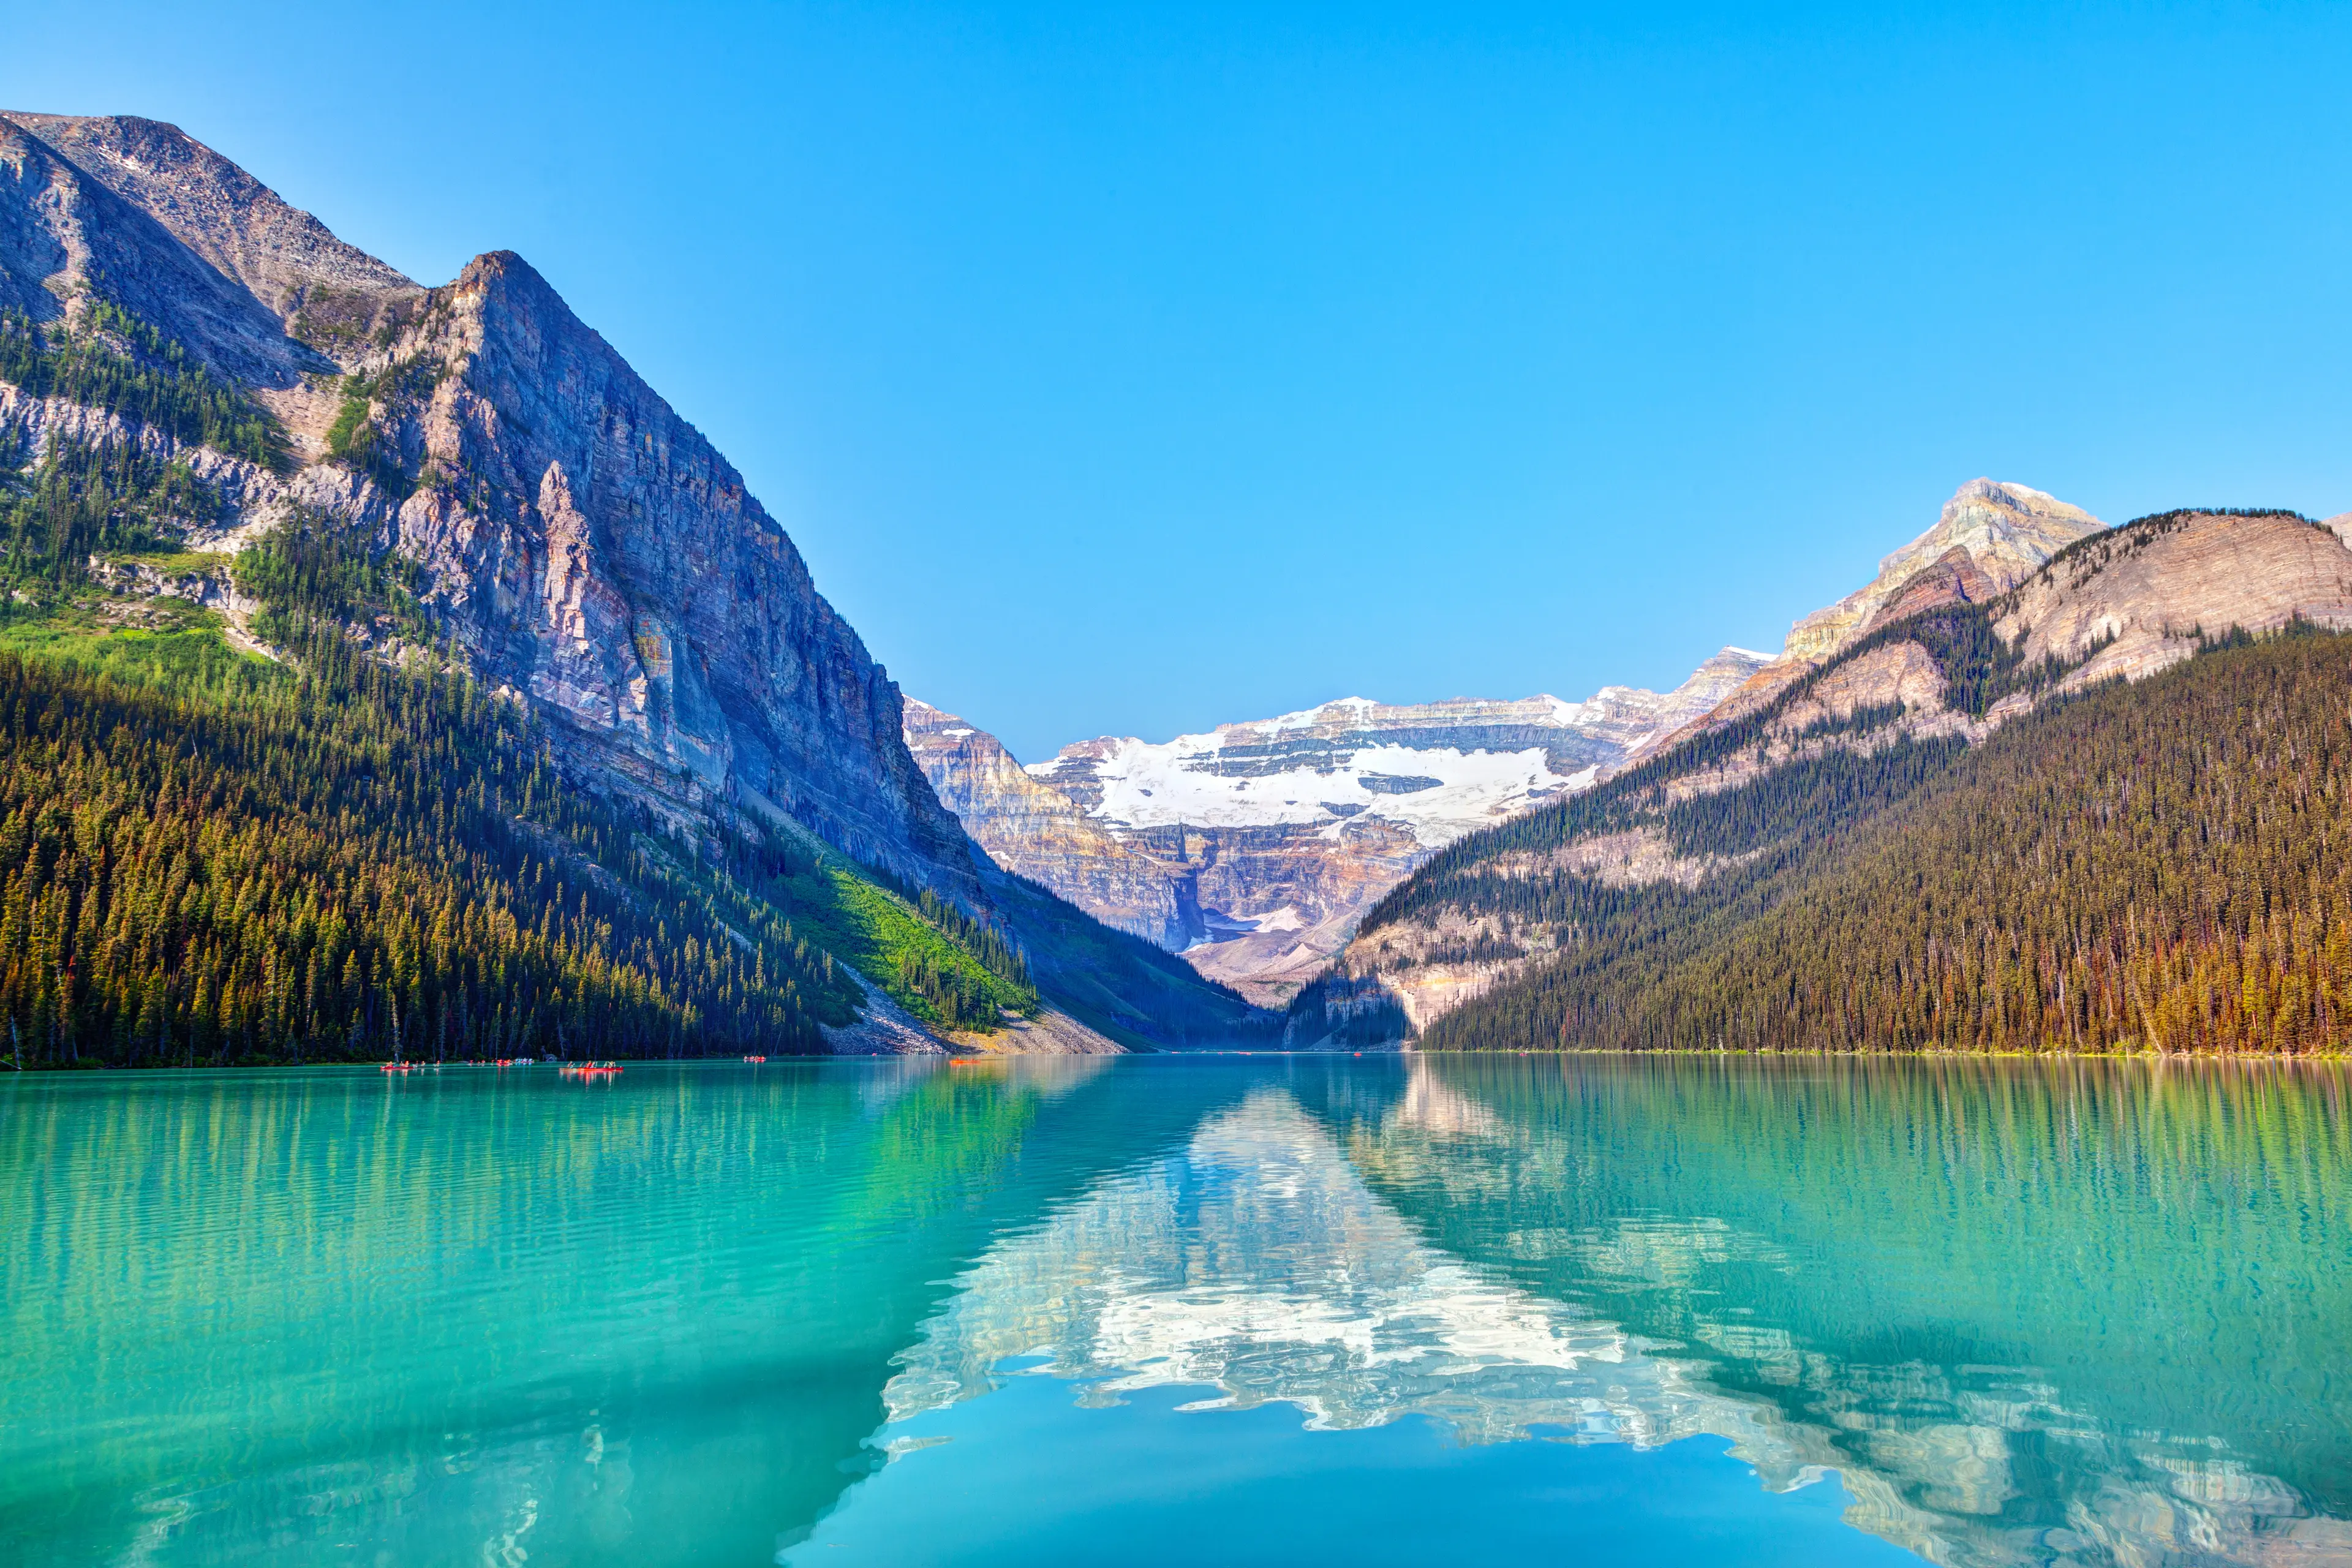 4-Day Relaxing and Sightseeing Couples Getaway in Banff, Alberta